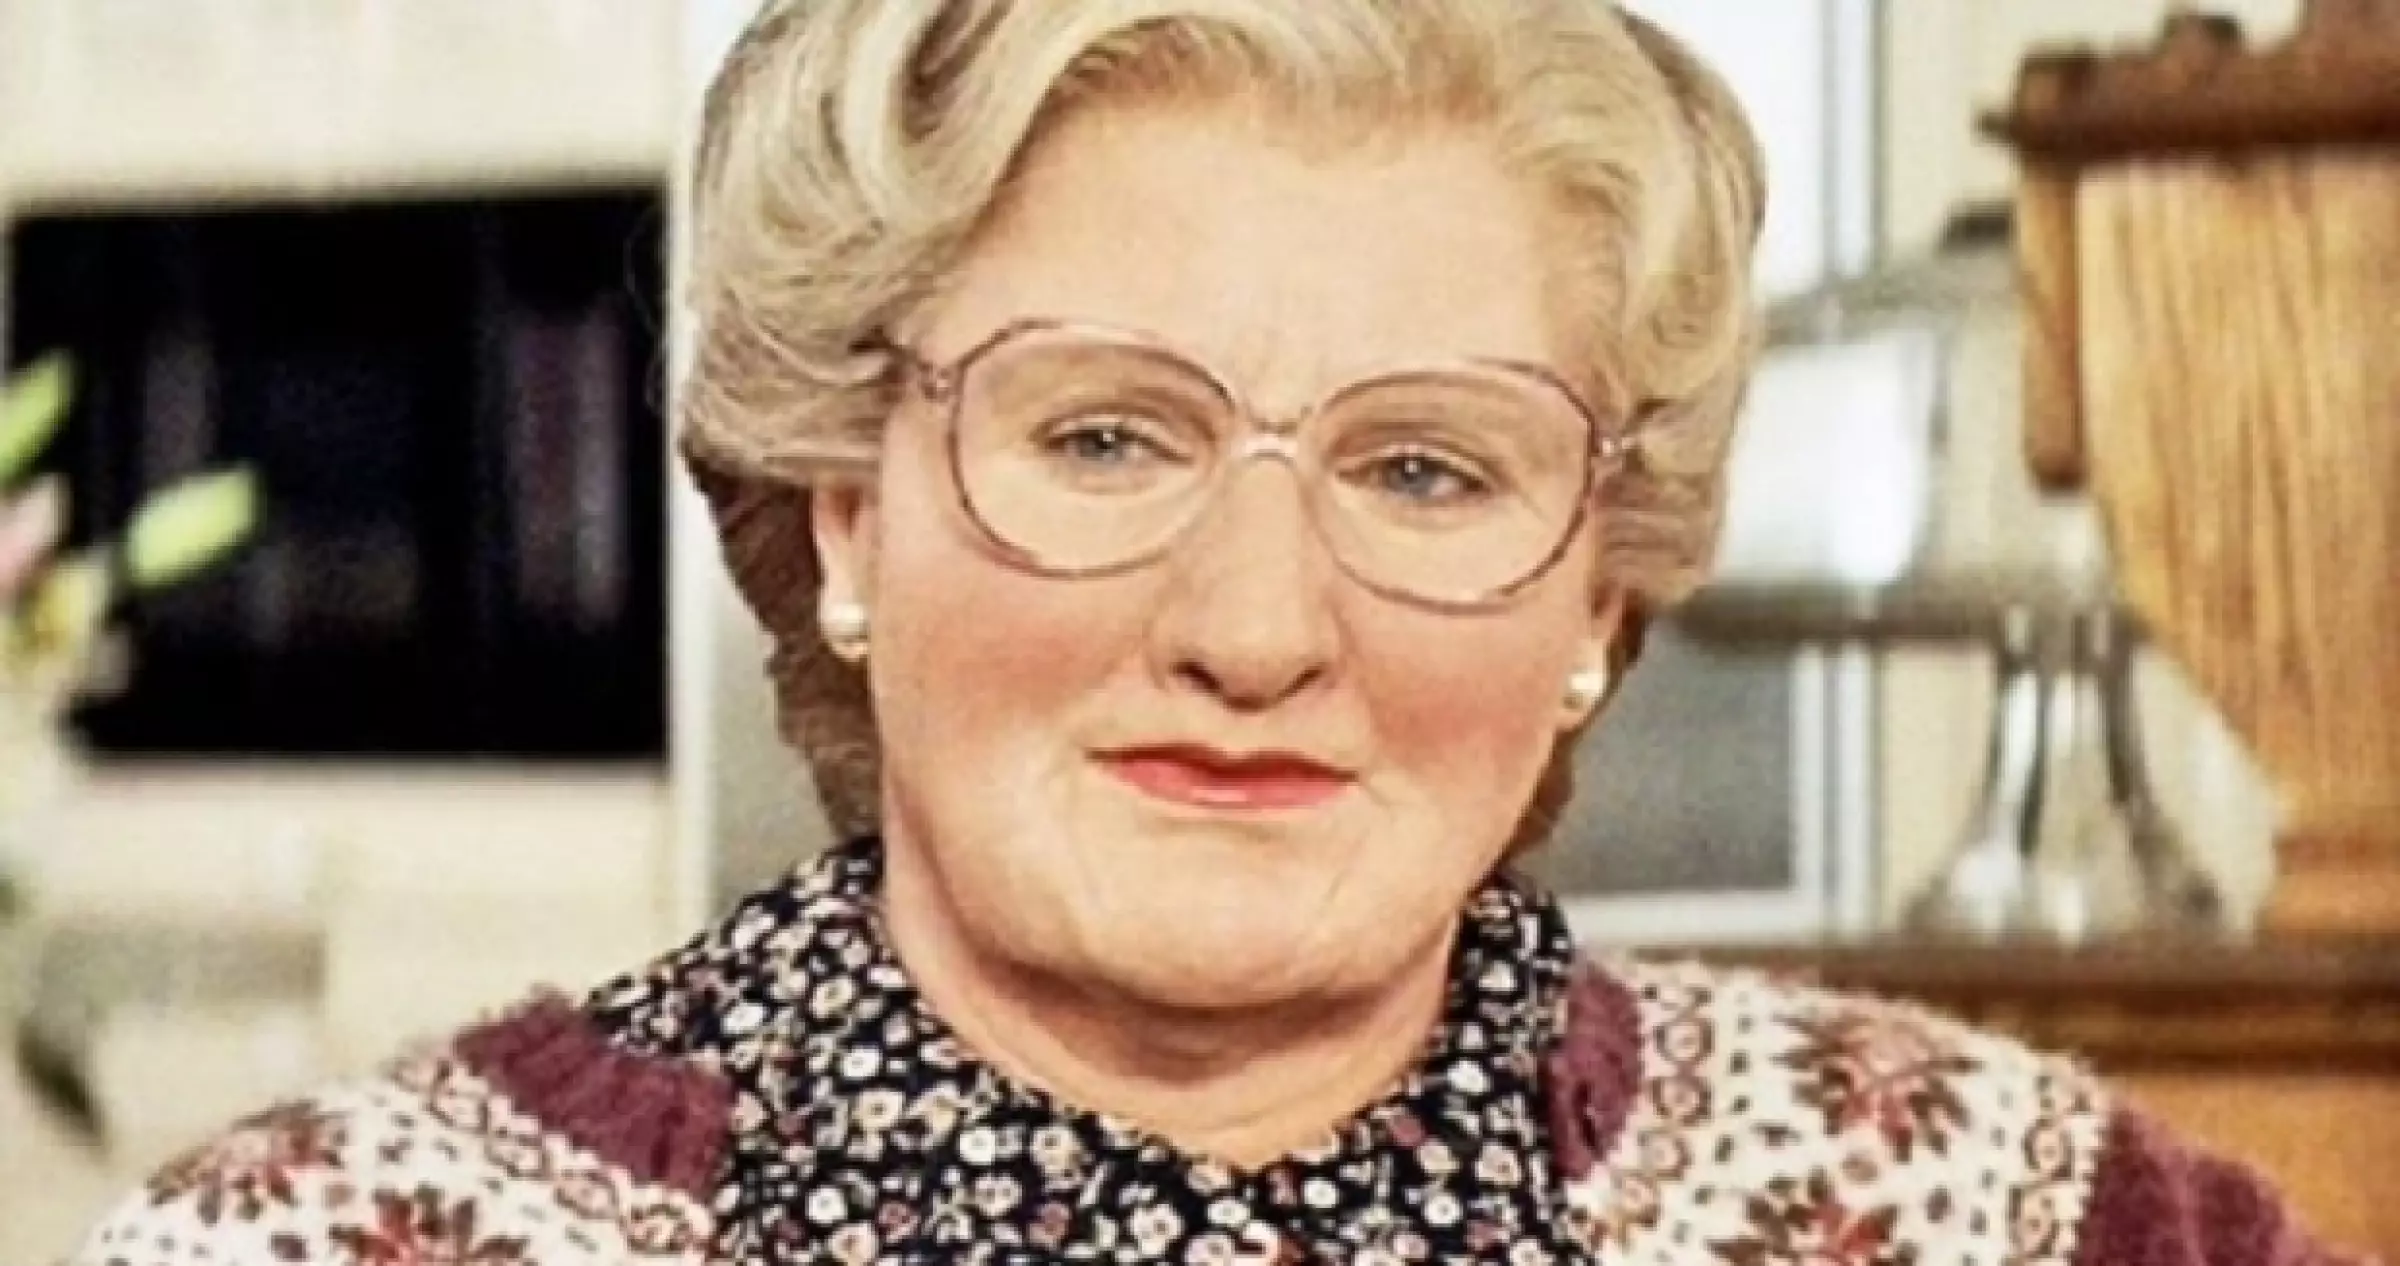 The original Mrs. Doubtfire was played by the late Robin Williams.